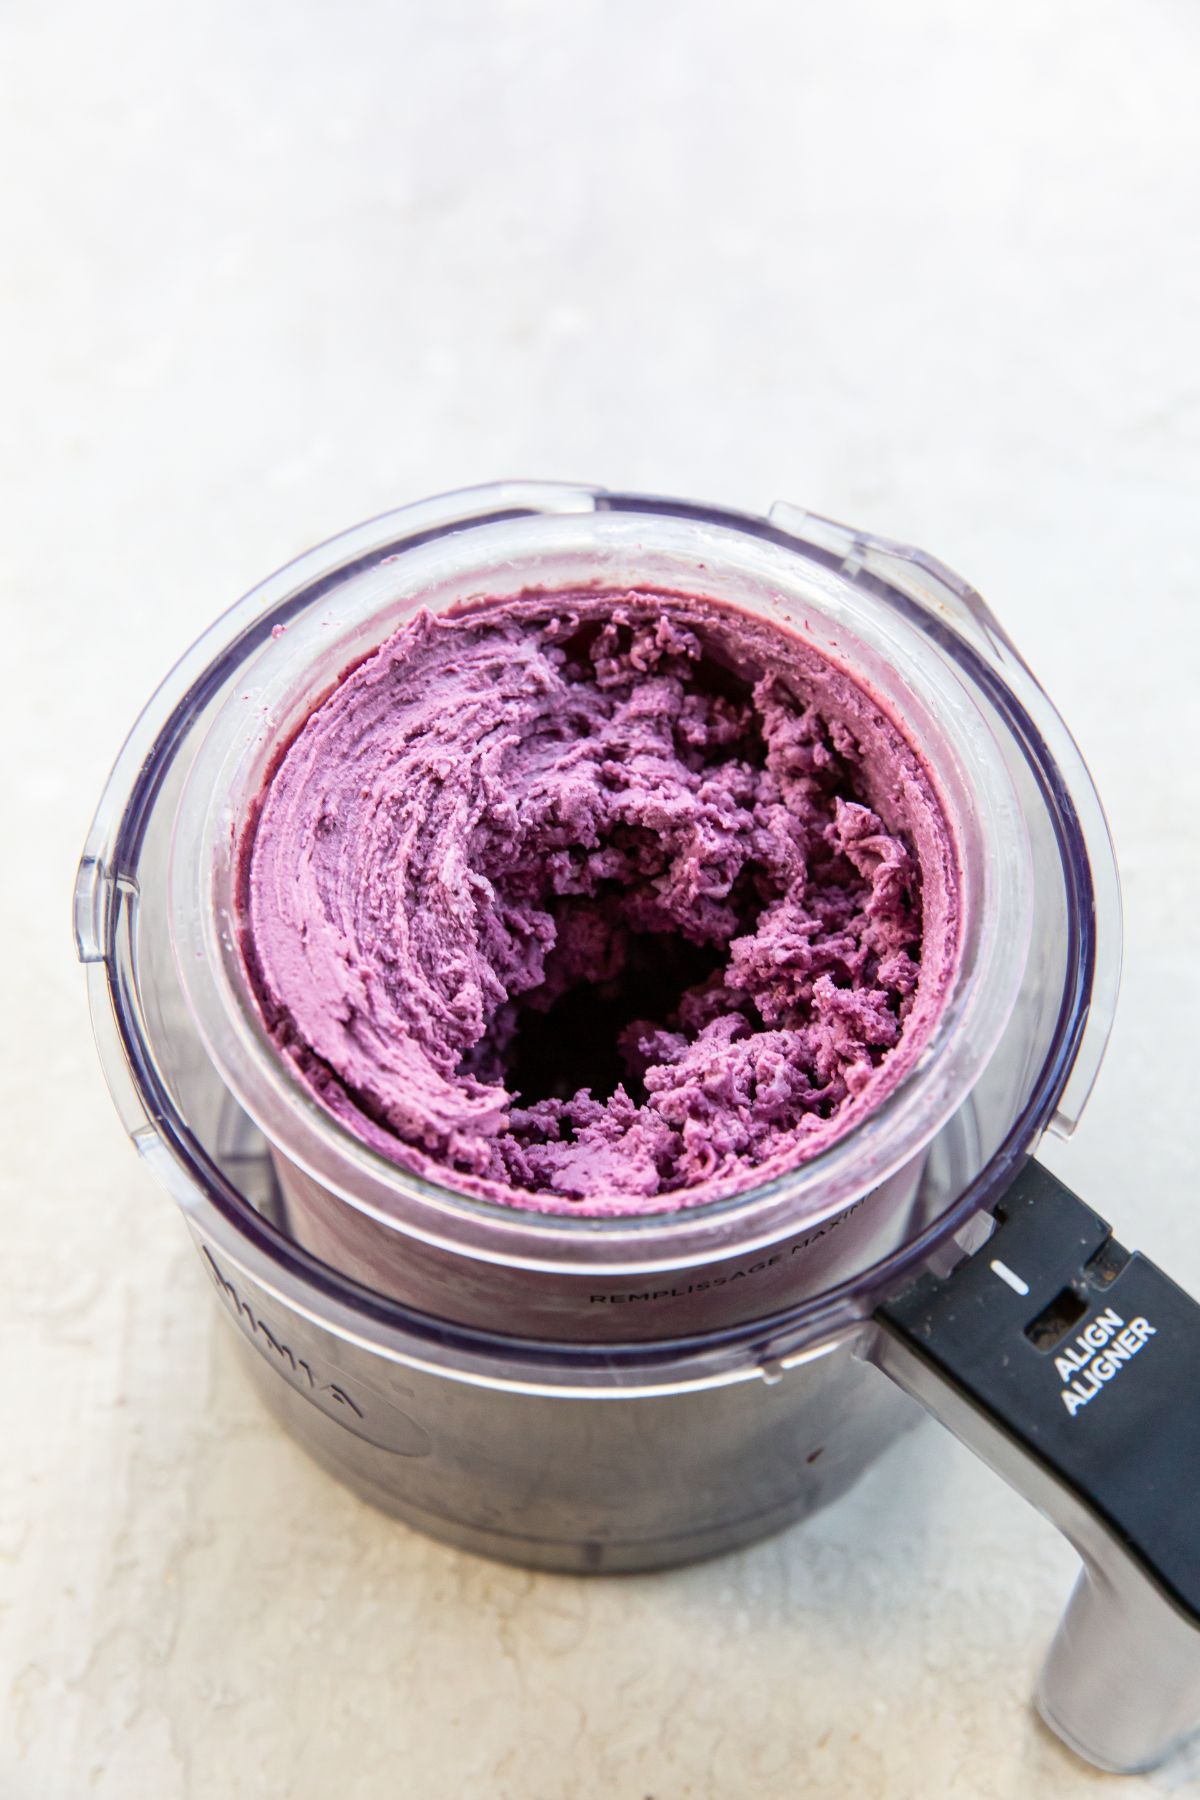 A blender filled with blueberry puree for making blueberry cheesecake ice cream.